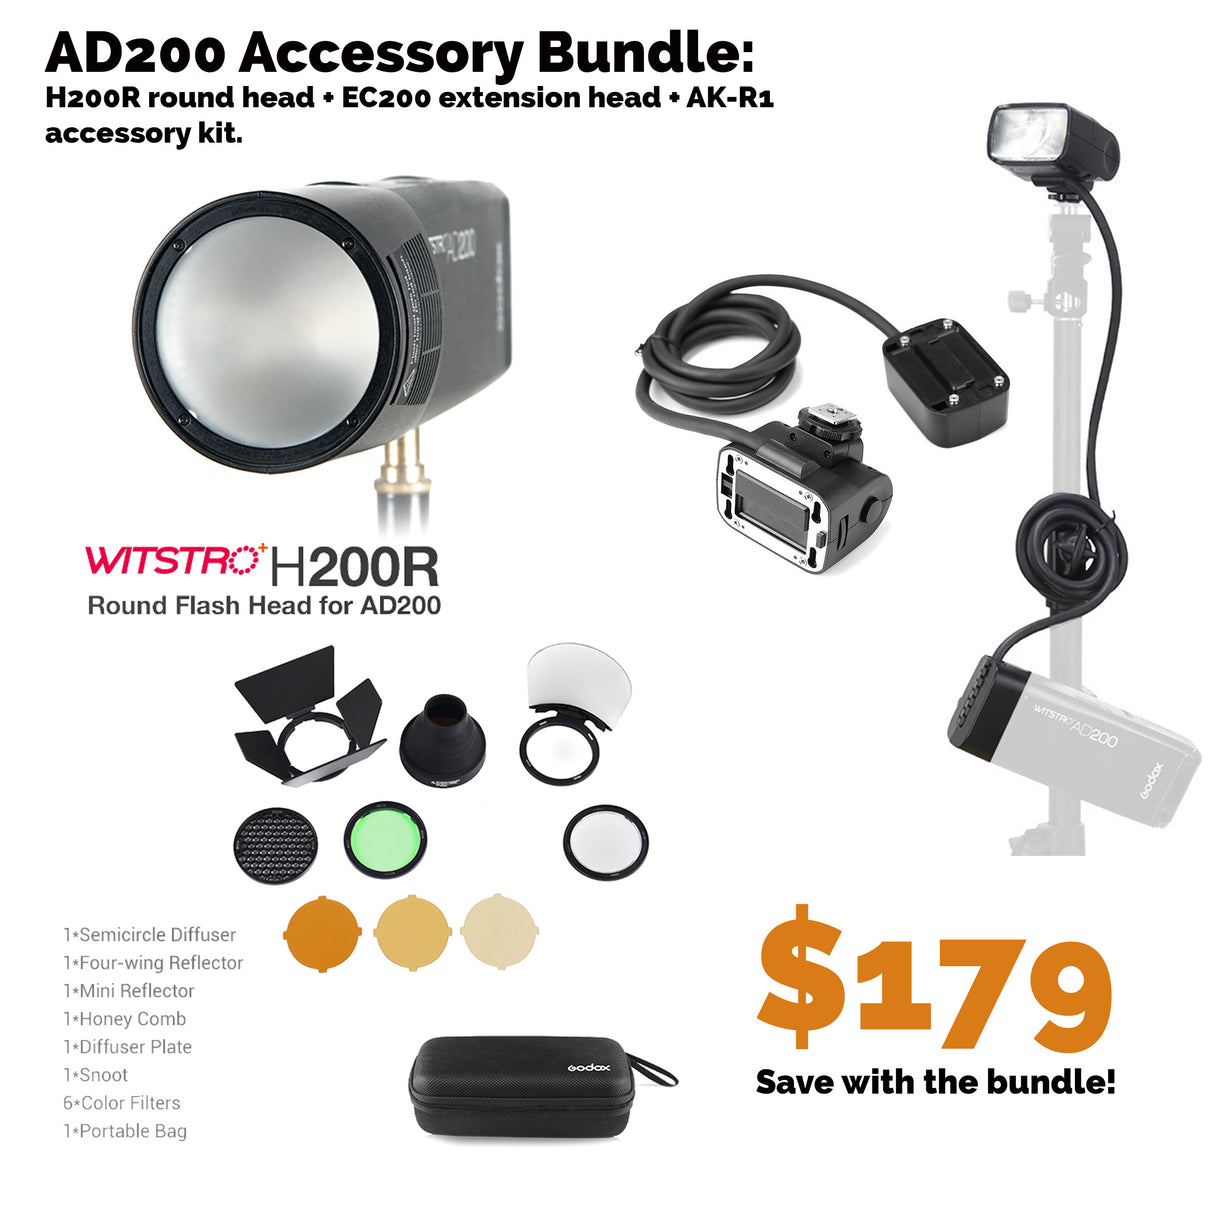 Bundle: Accessories for the AD200/AD200Pro